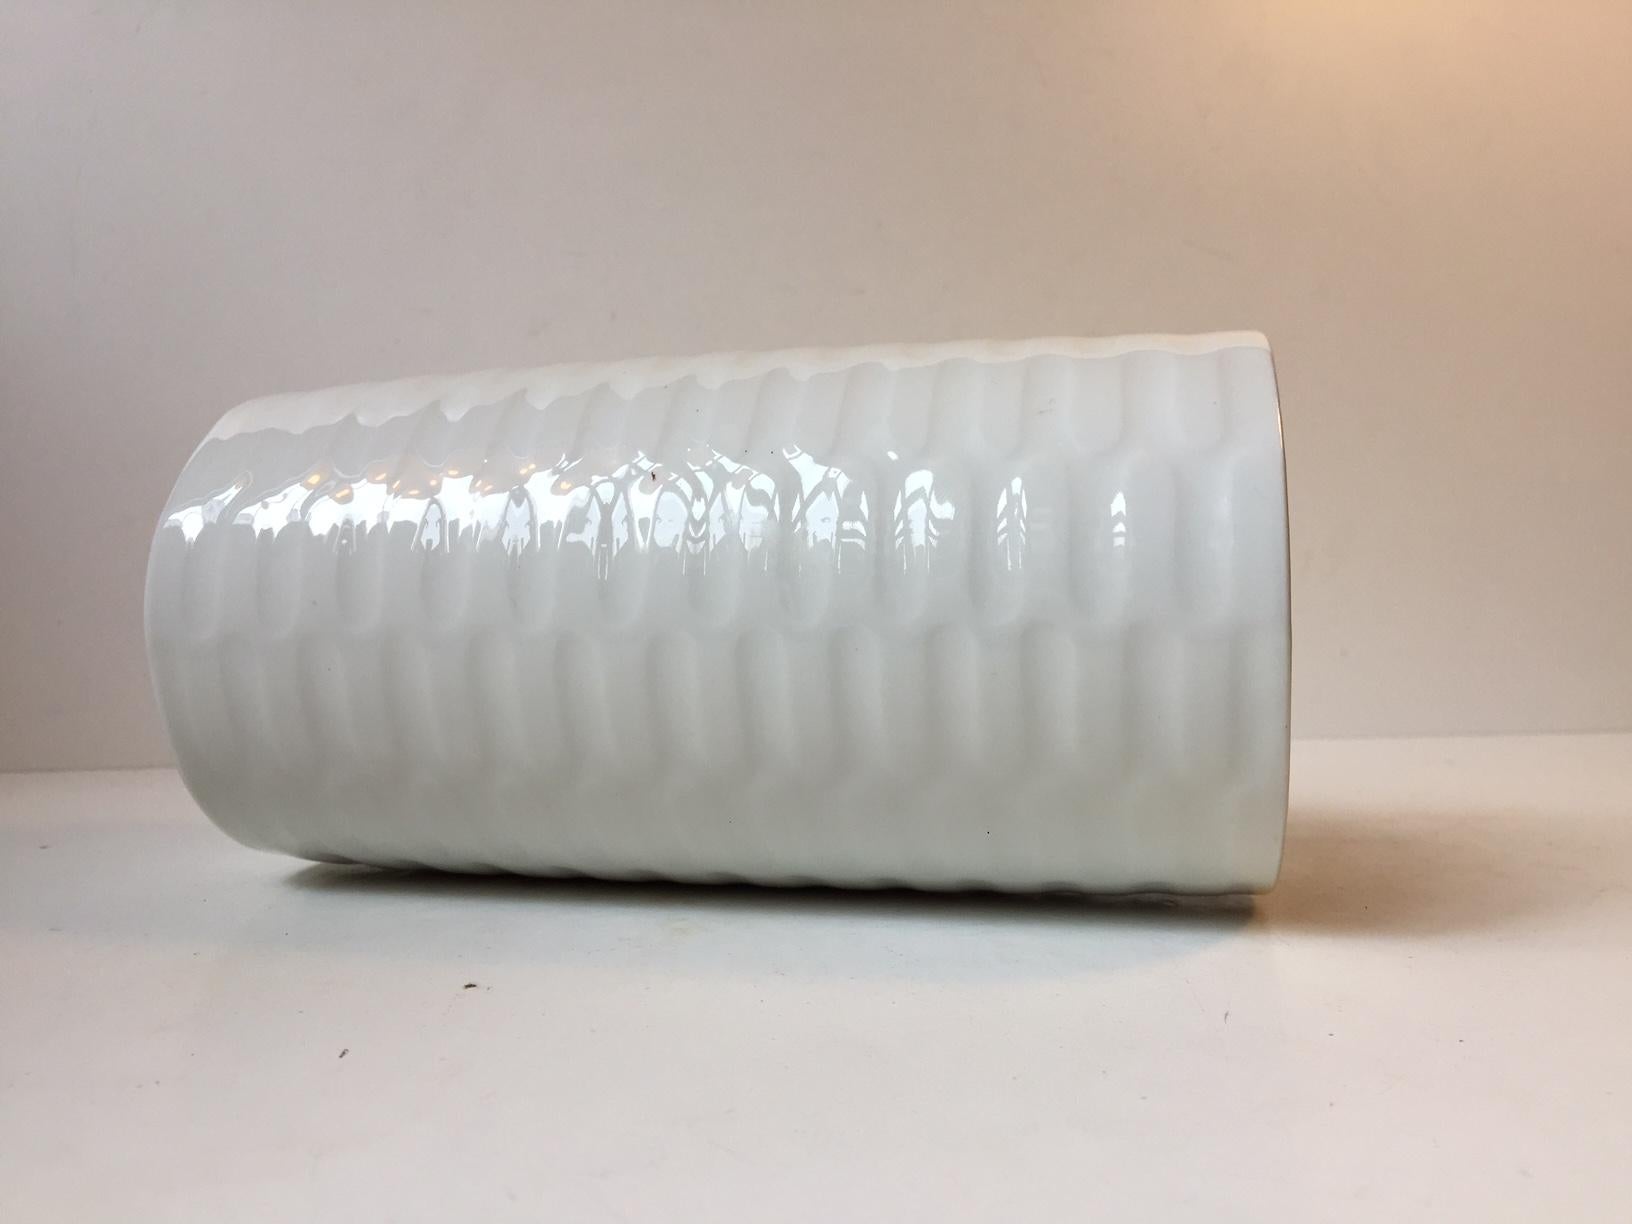 Cylindrical vase in Faience designed by Danish ceramist Anni Jeppesen and manufactured by Royal Copenhagen. Made in Denmark during the 1970s. Fully signed (AJ), numbered and marked to its base. Stylistically it is reminiscent of Axel Salto 's later